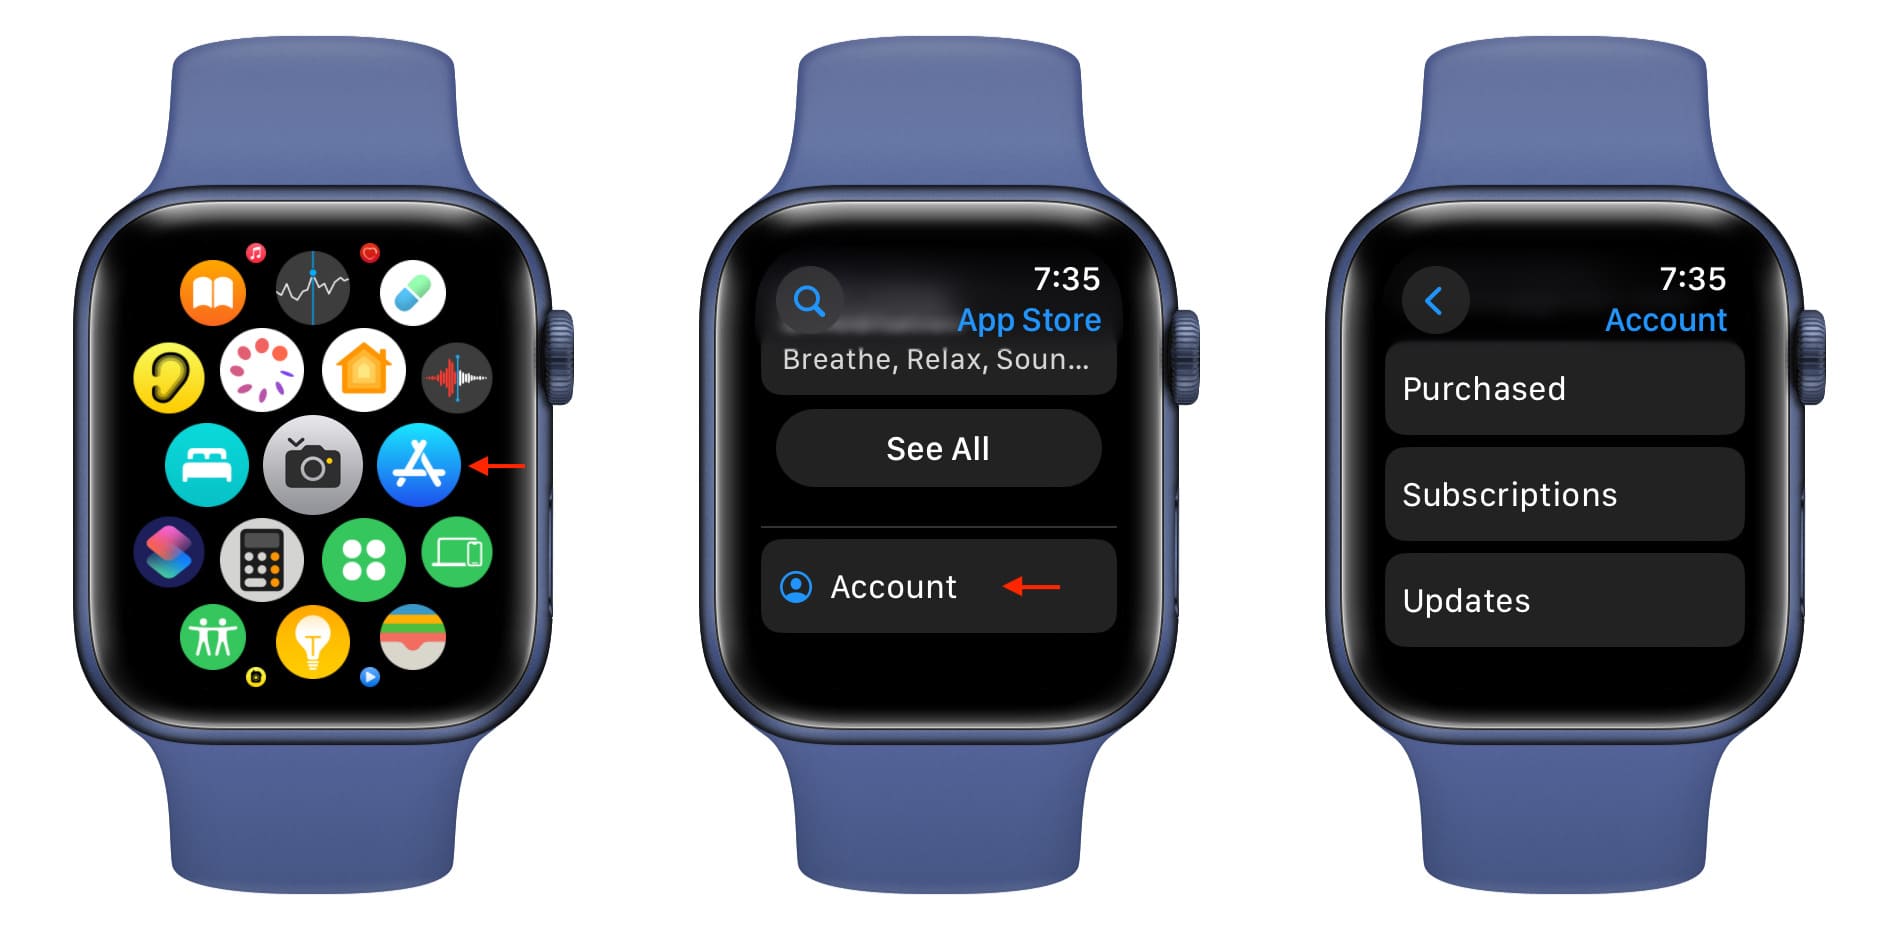 Account, Subscriptions, and Updates in Apple Watch App Store